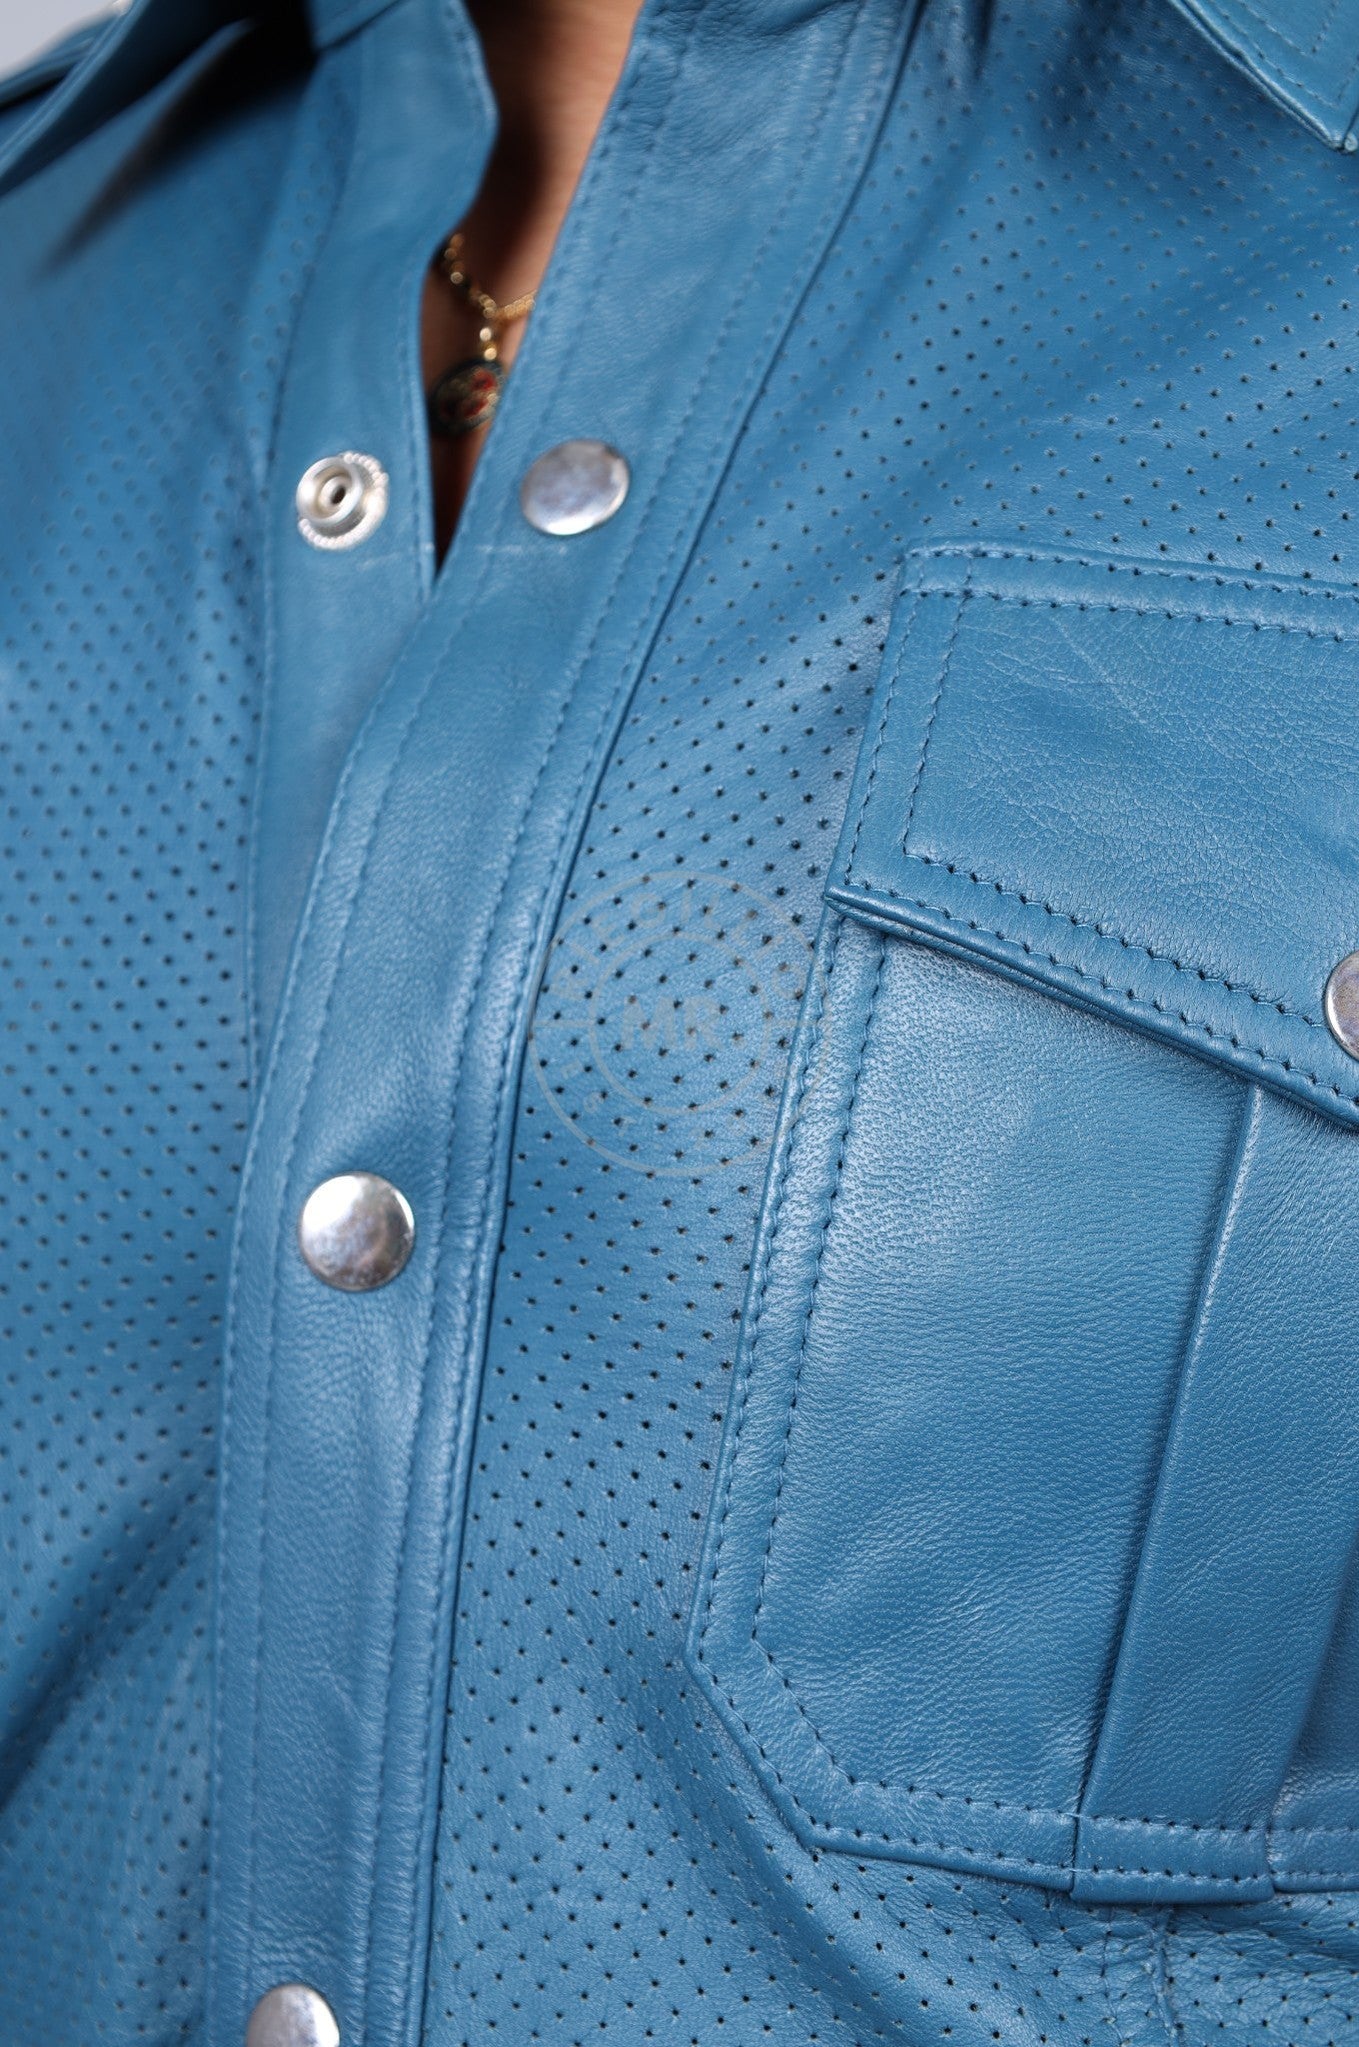 Jeans Blue Leather Perforated Shirt-at MR. Riegillio